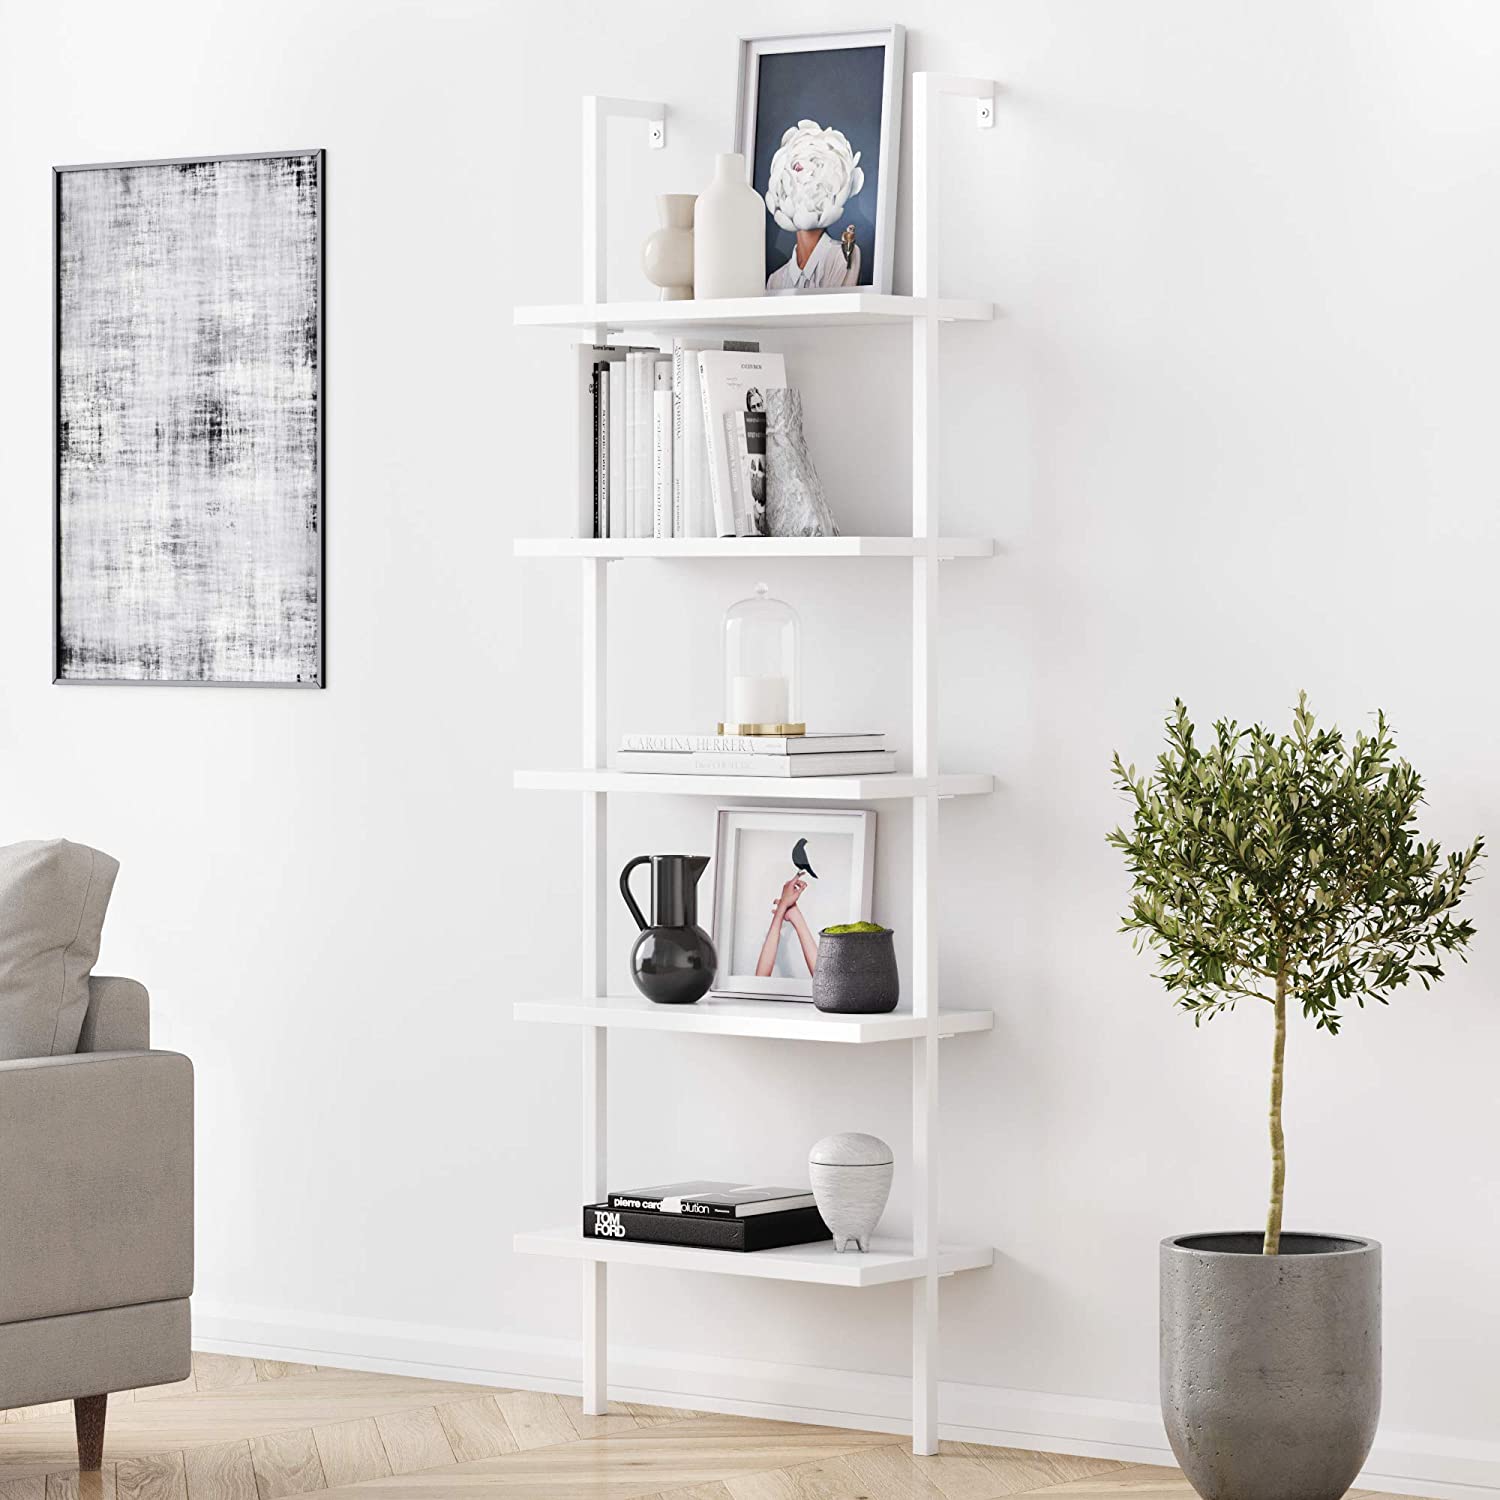 Nathan Lane wall mounted bookshelf for a bedroom, family room or bedroom. 